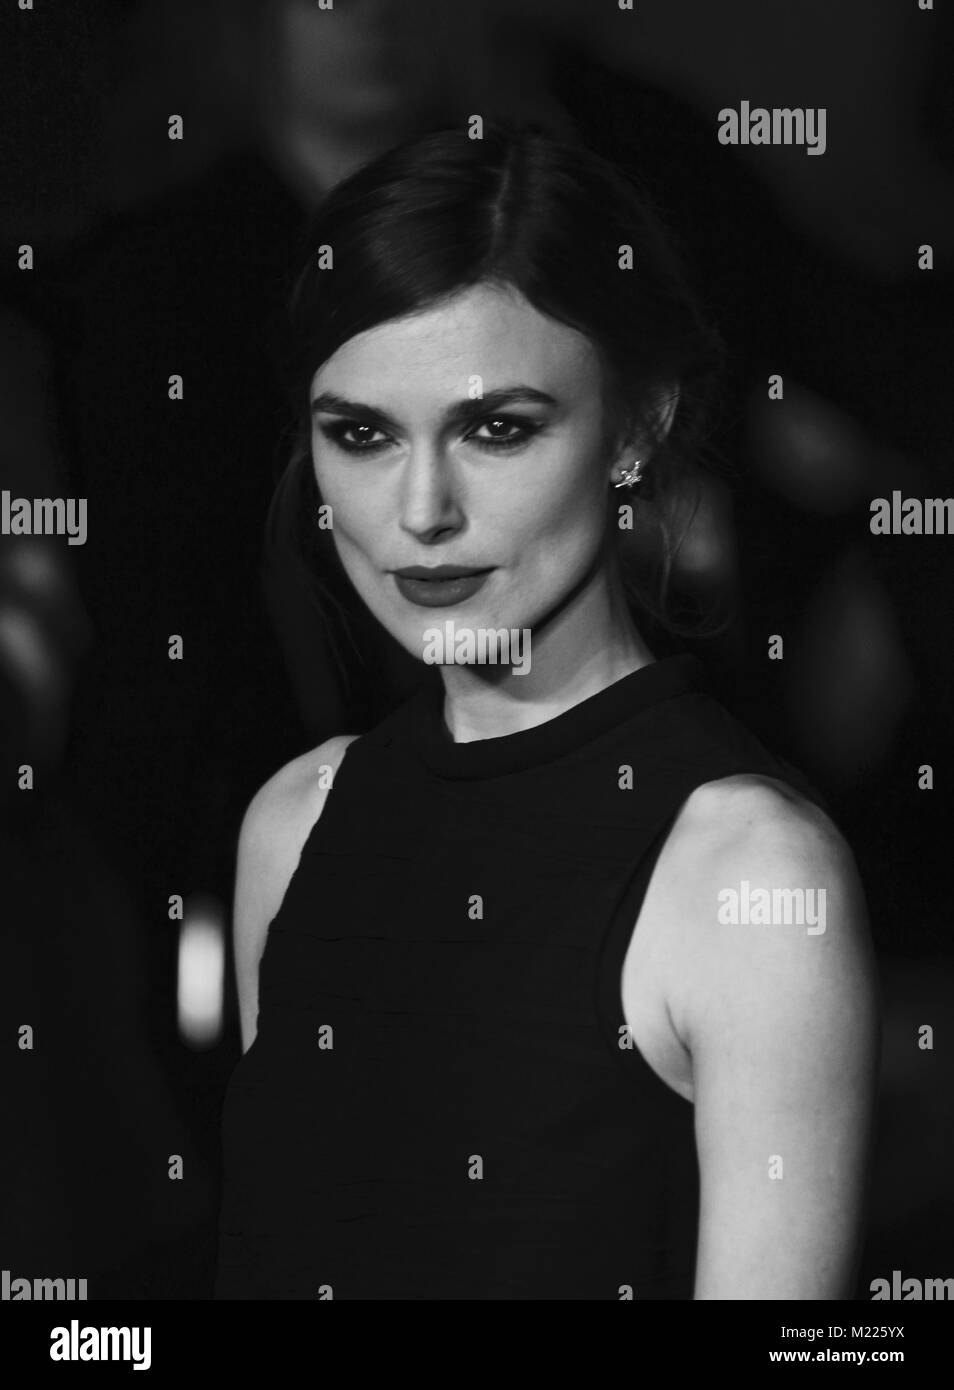 Keira knightley actress Black and White Stock Photos & Images - Alamy